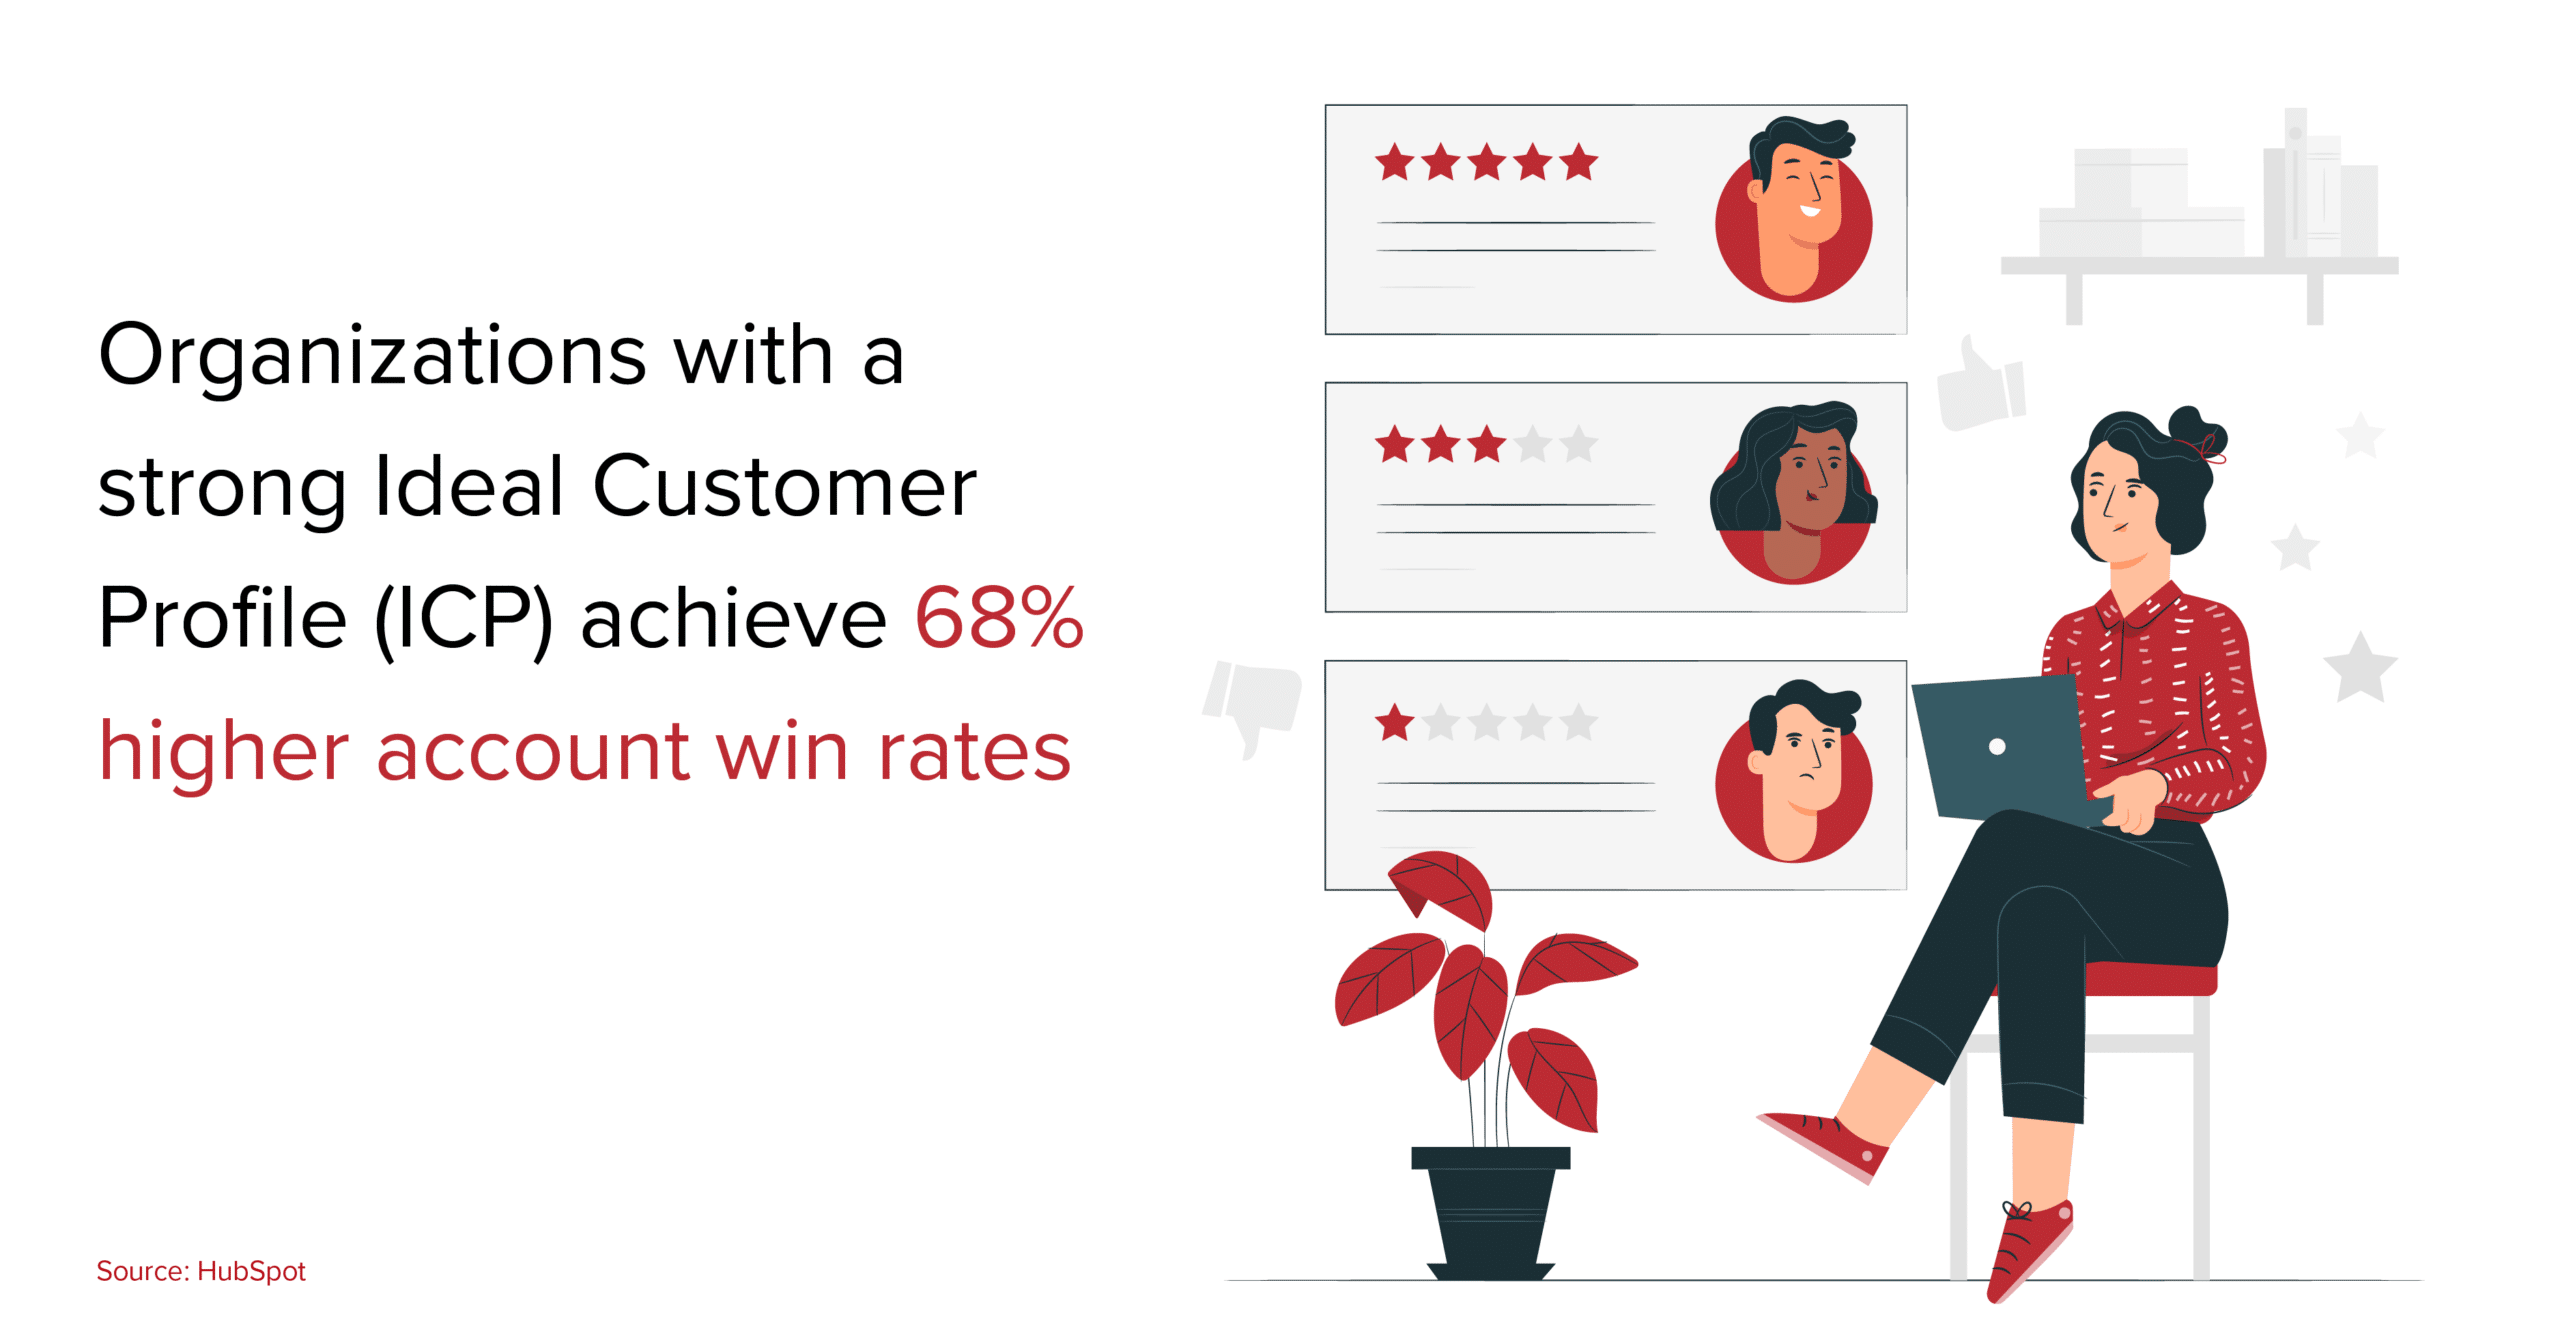 Organizations with a strong Ideal Customer Profile (ICP) achieve 68% higher account win rates